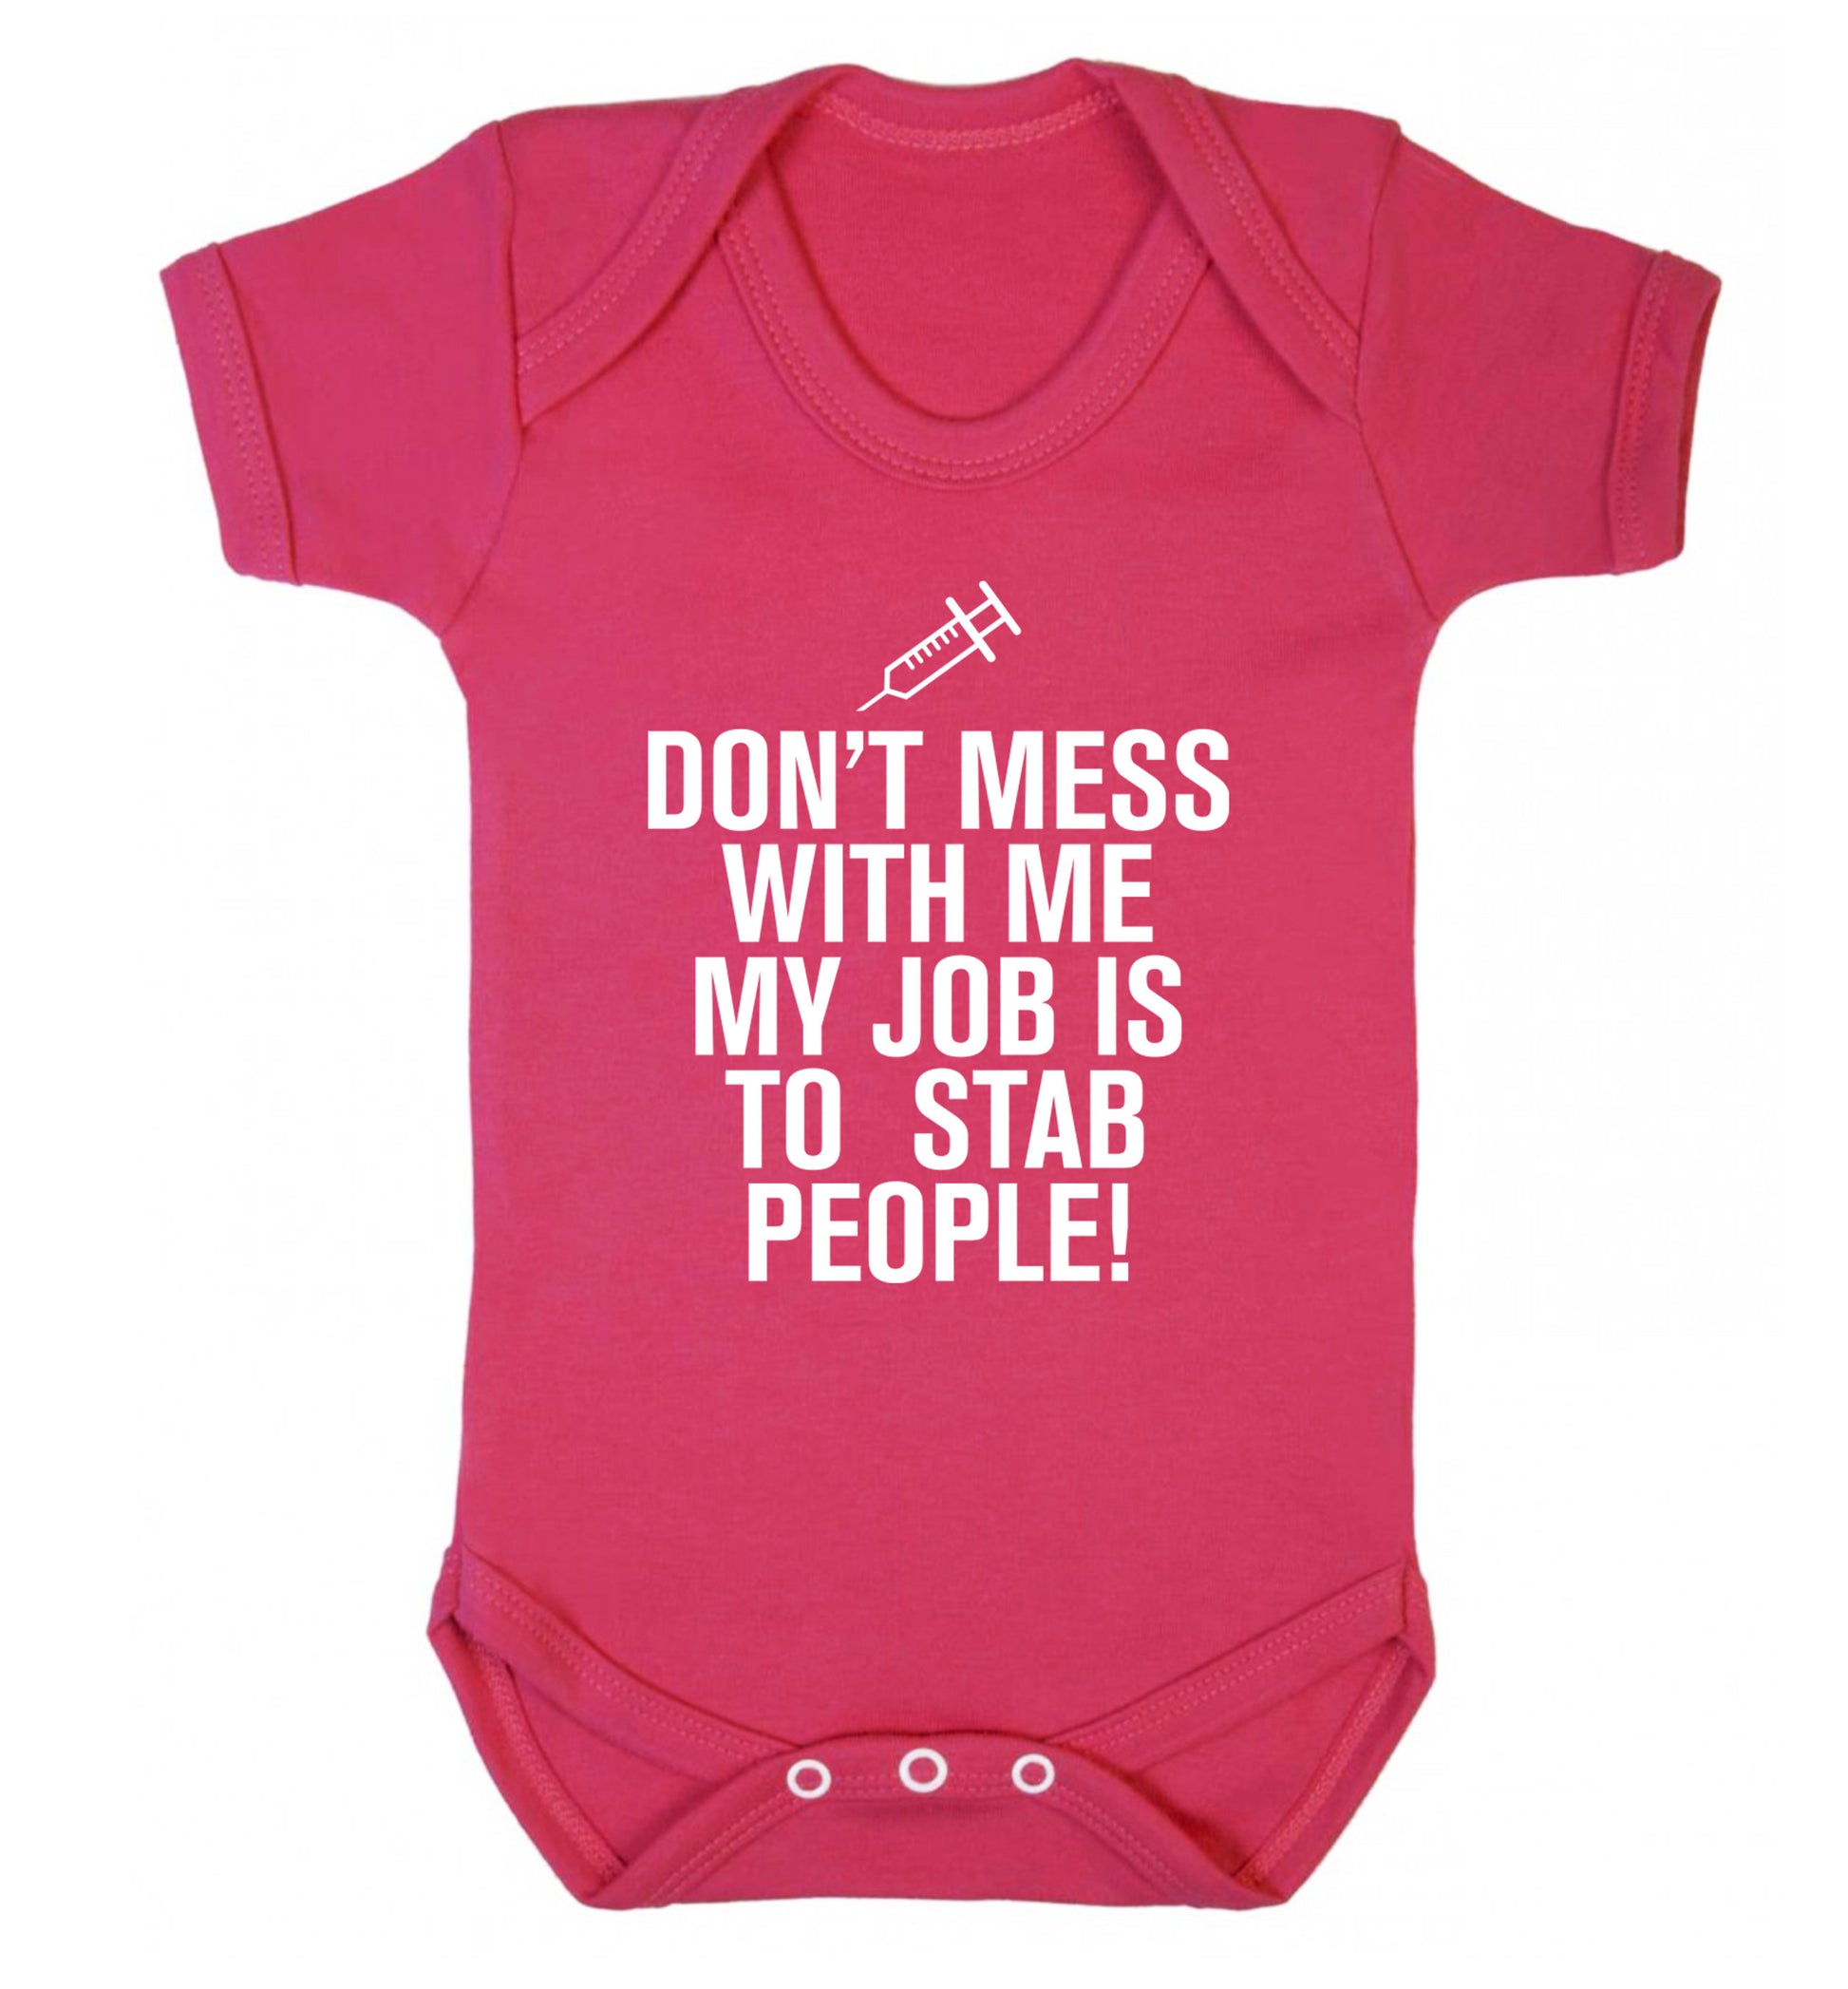 Don't mess with me my job is to stab people! Baby Vest dark pink 18-24 months